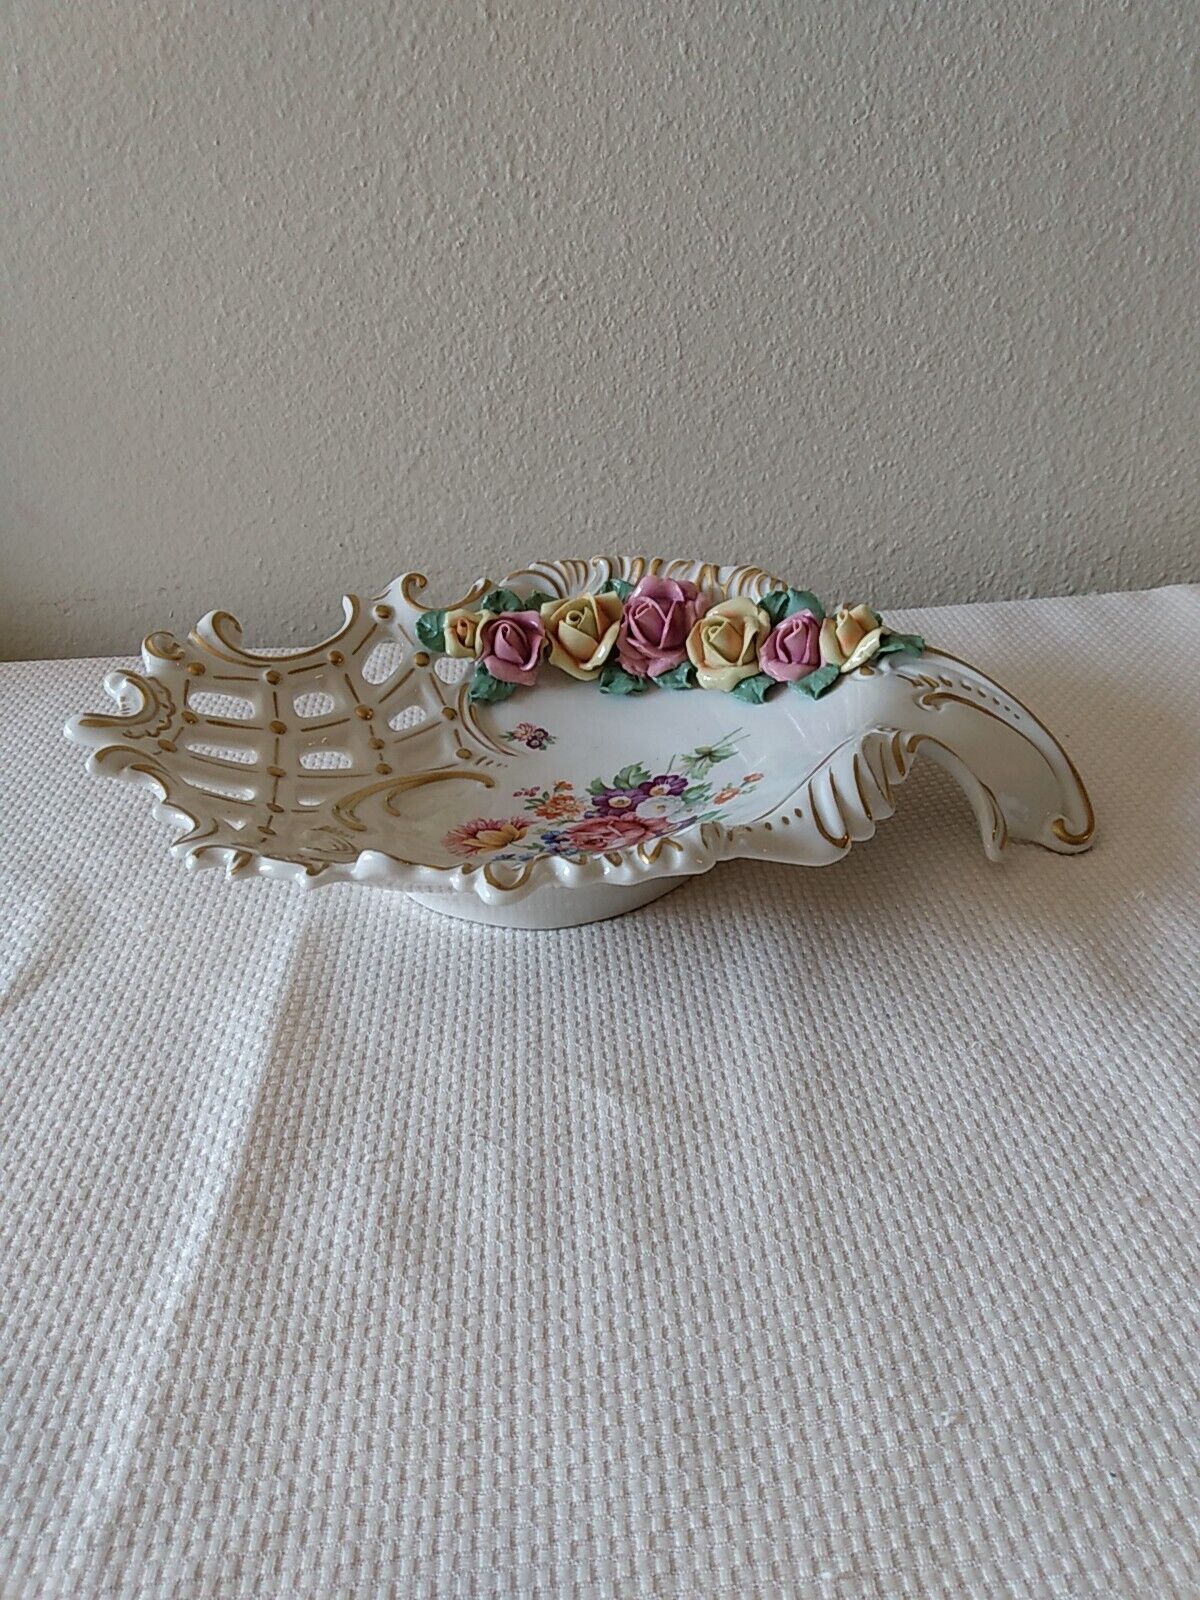 Frankenthal, F. W. Wessel Porcelain Candy Dish With Gold Trim And Applied Roses,